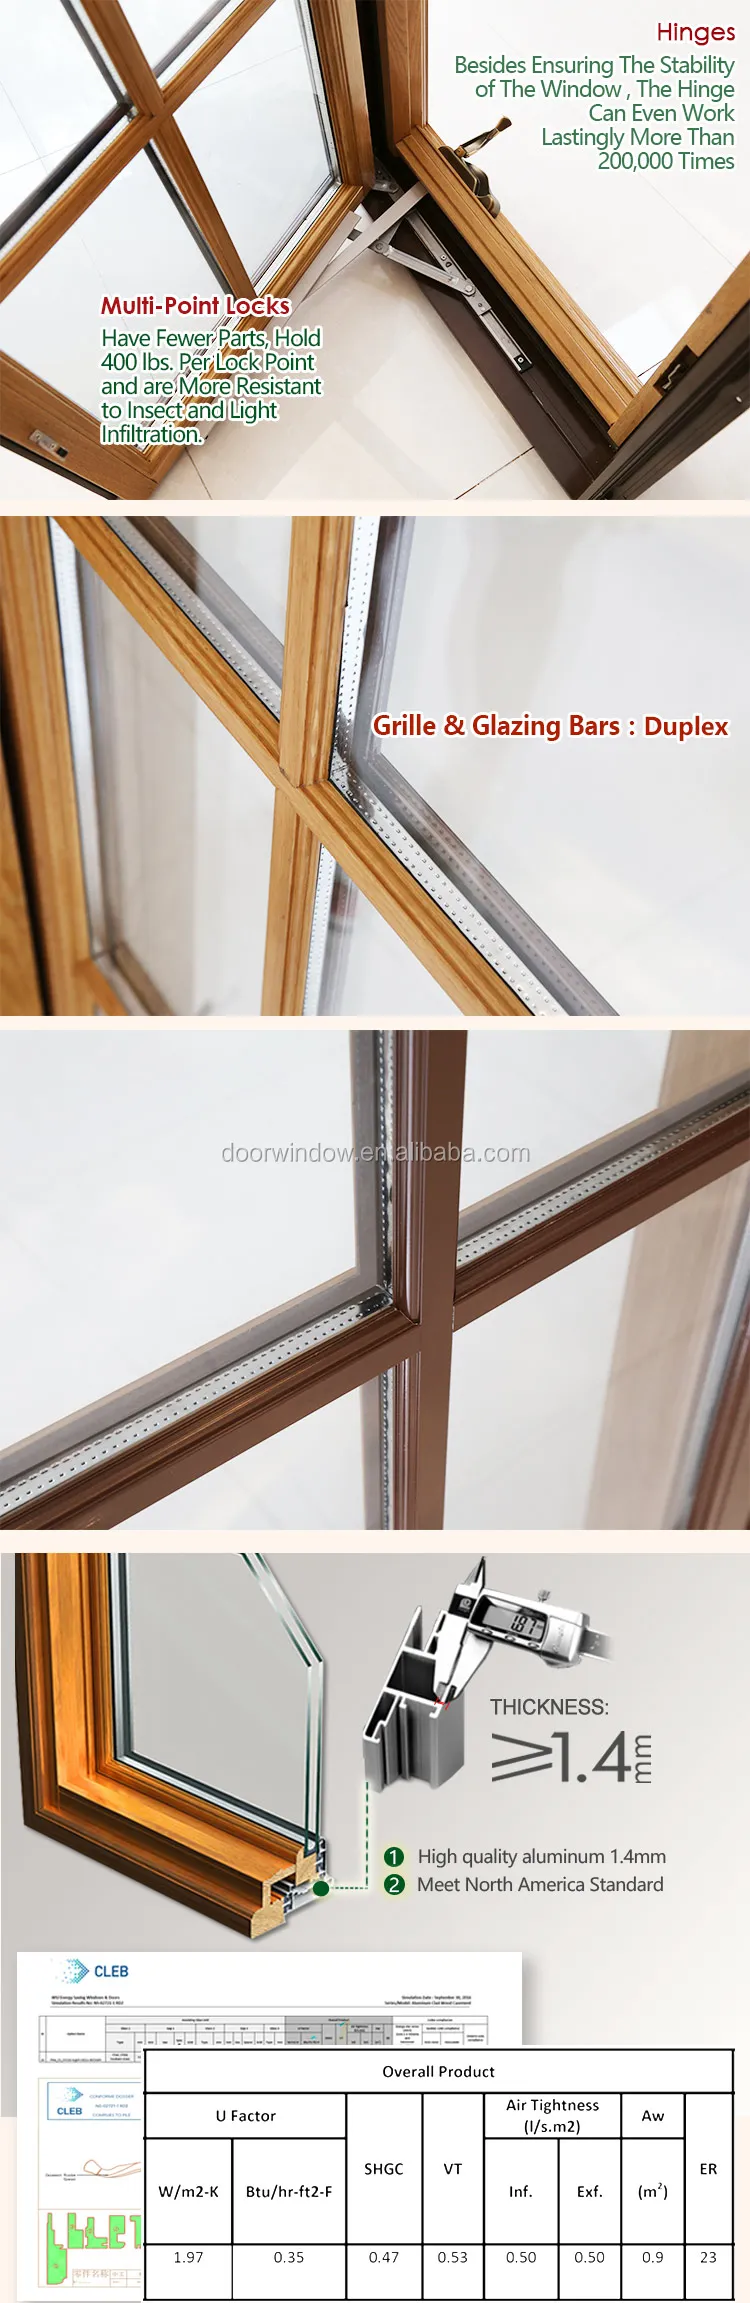 American building code aluminum wood frame glass doors and crank out windows